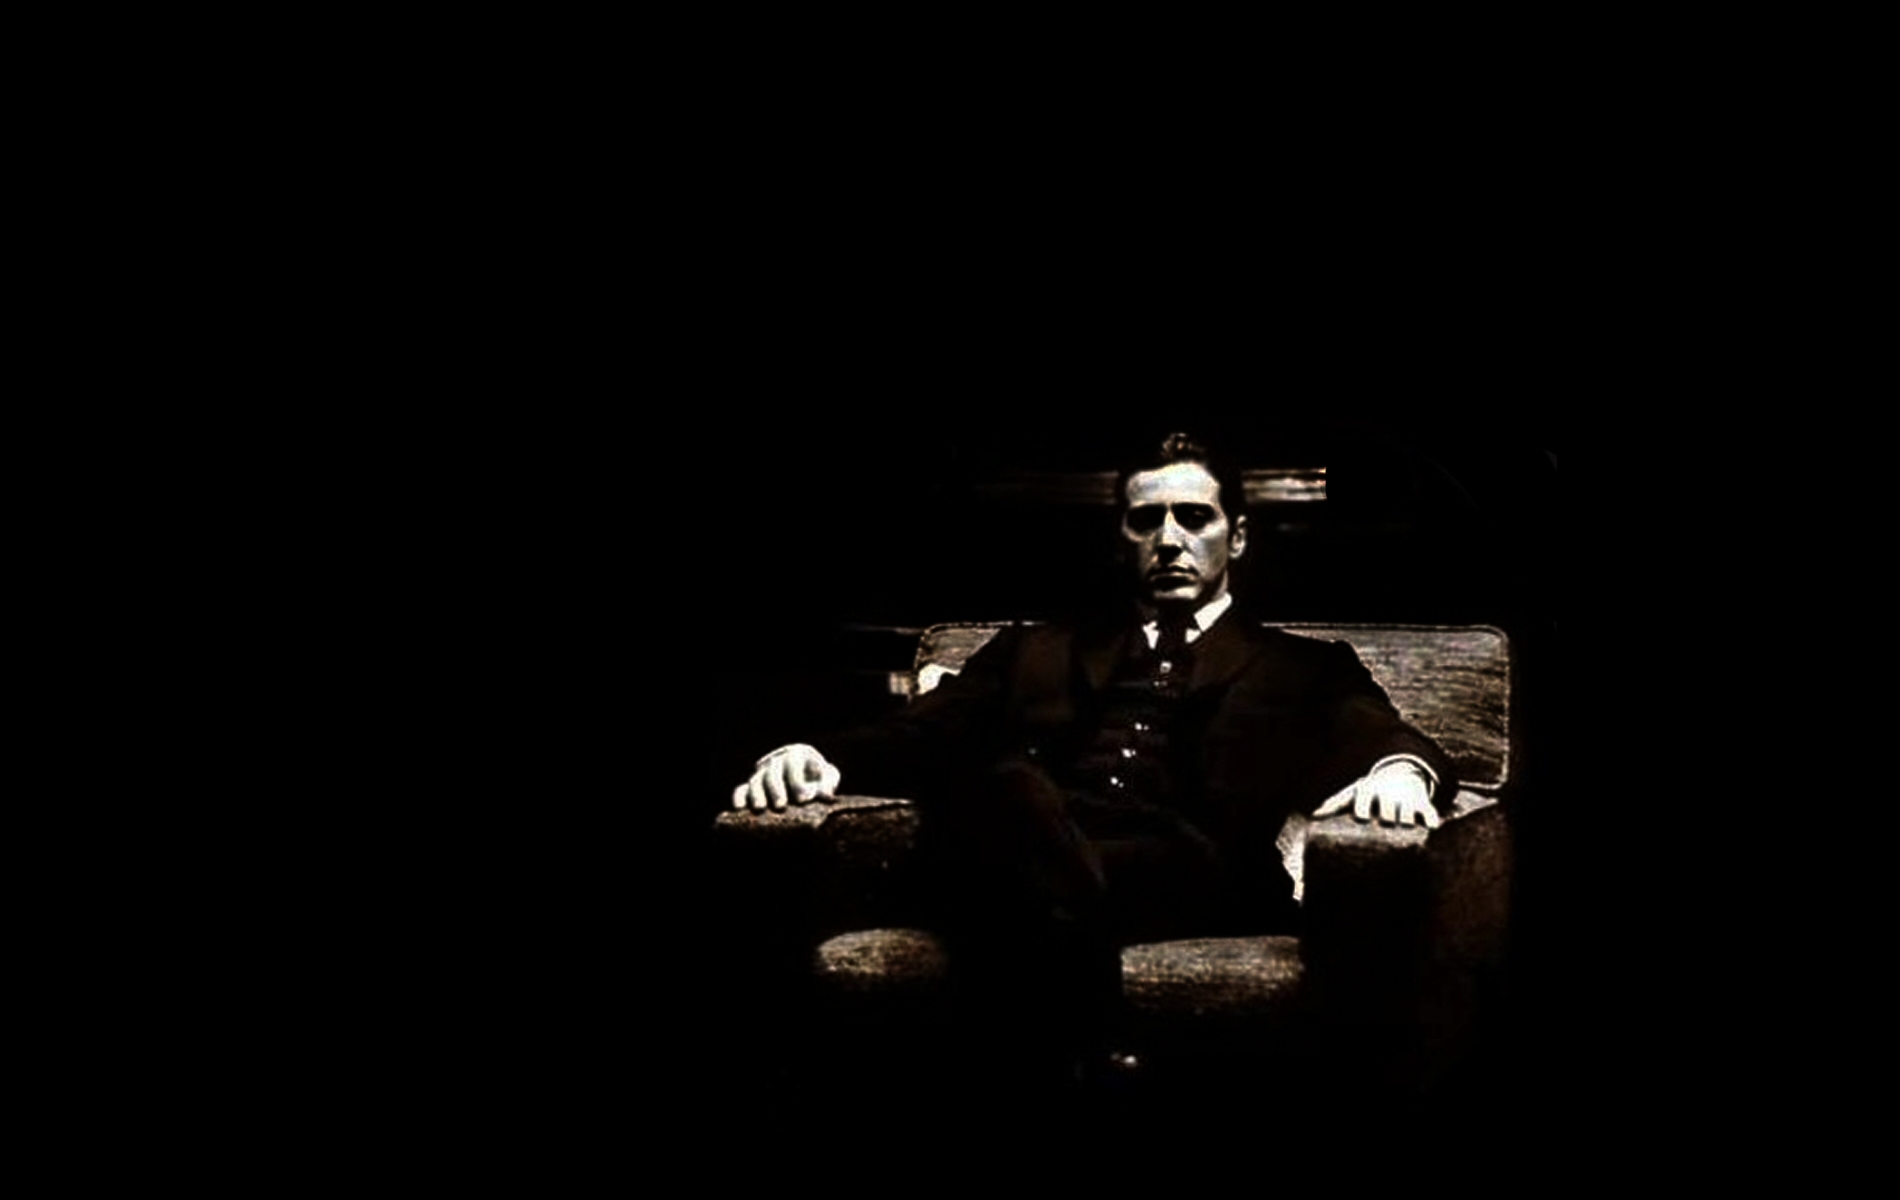 The Godfather HD Wallpaper Background